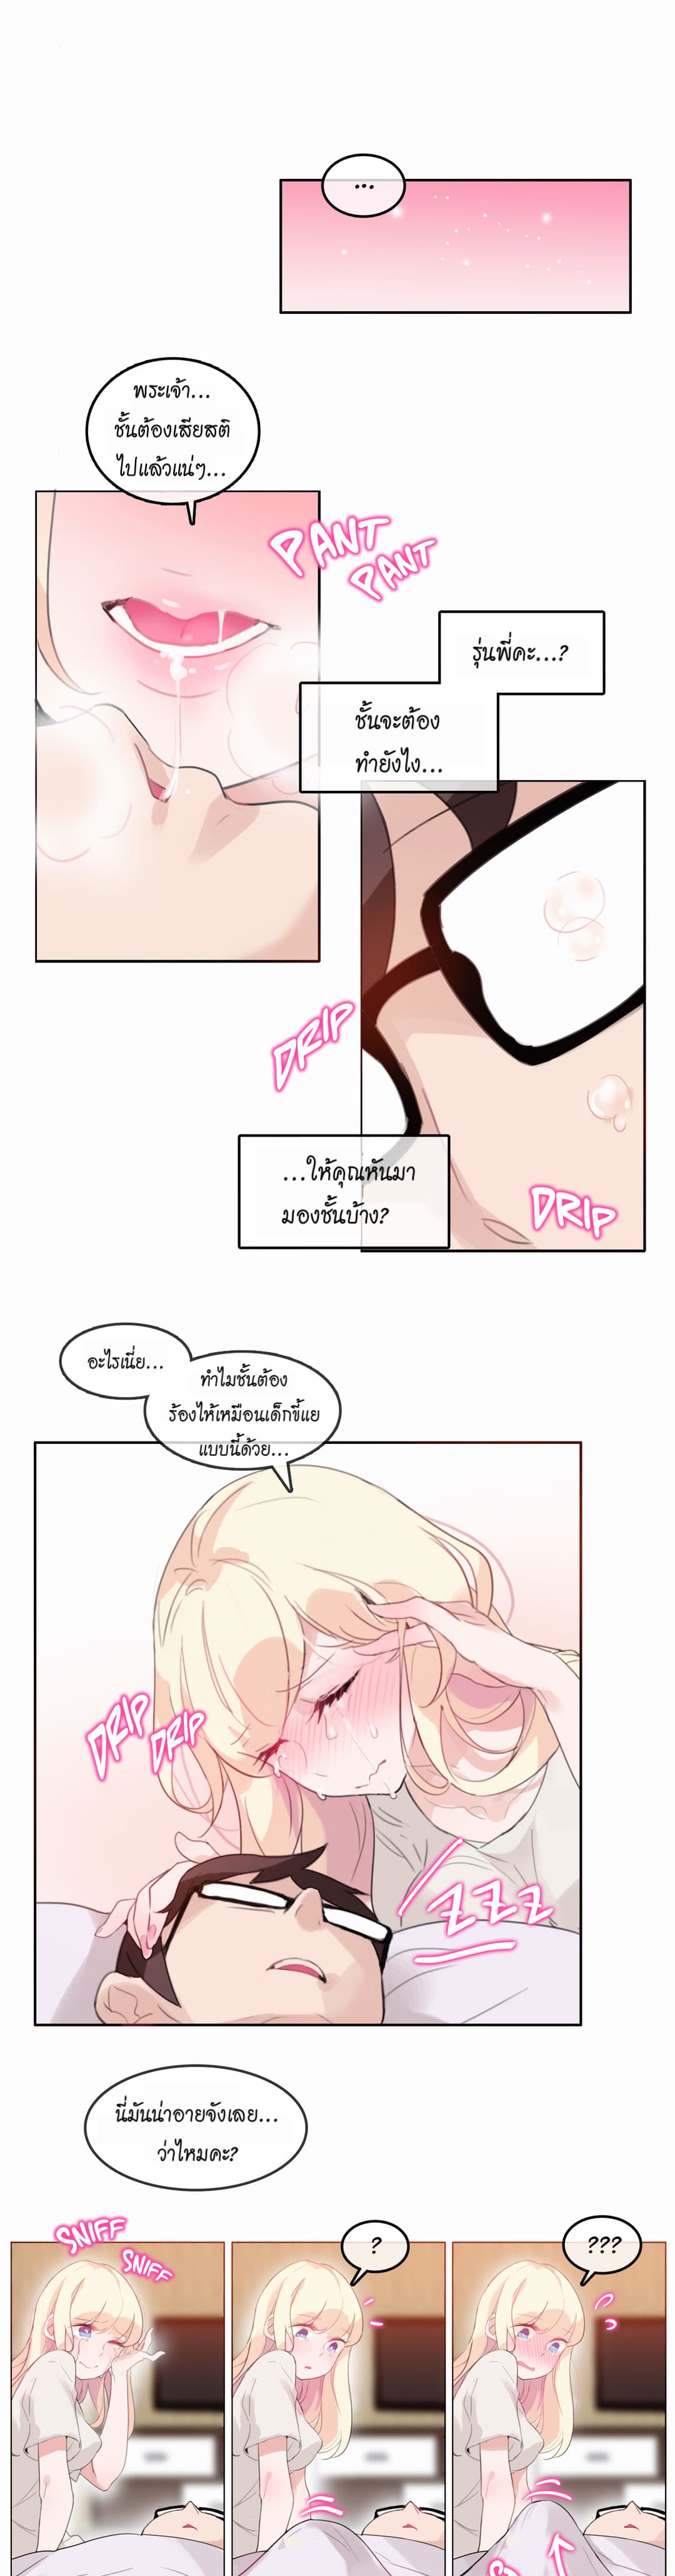 A Pervert’s Daily Life 21 (12)